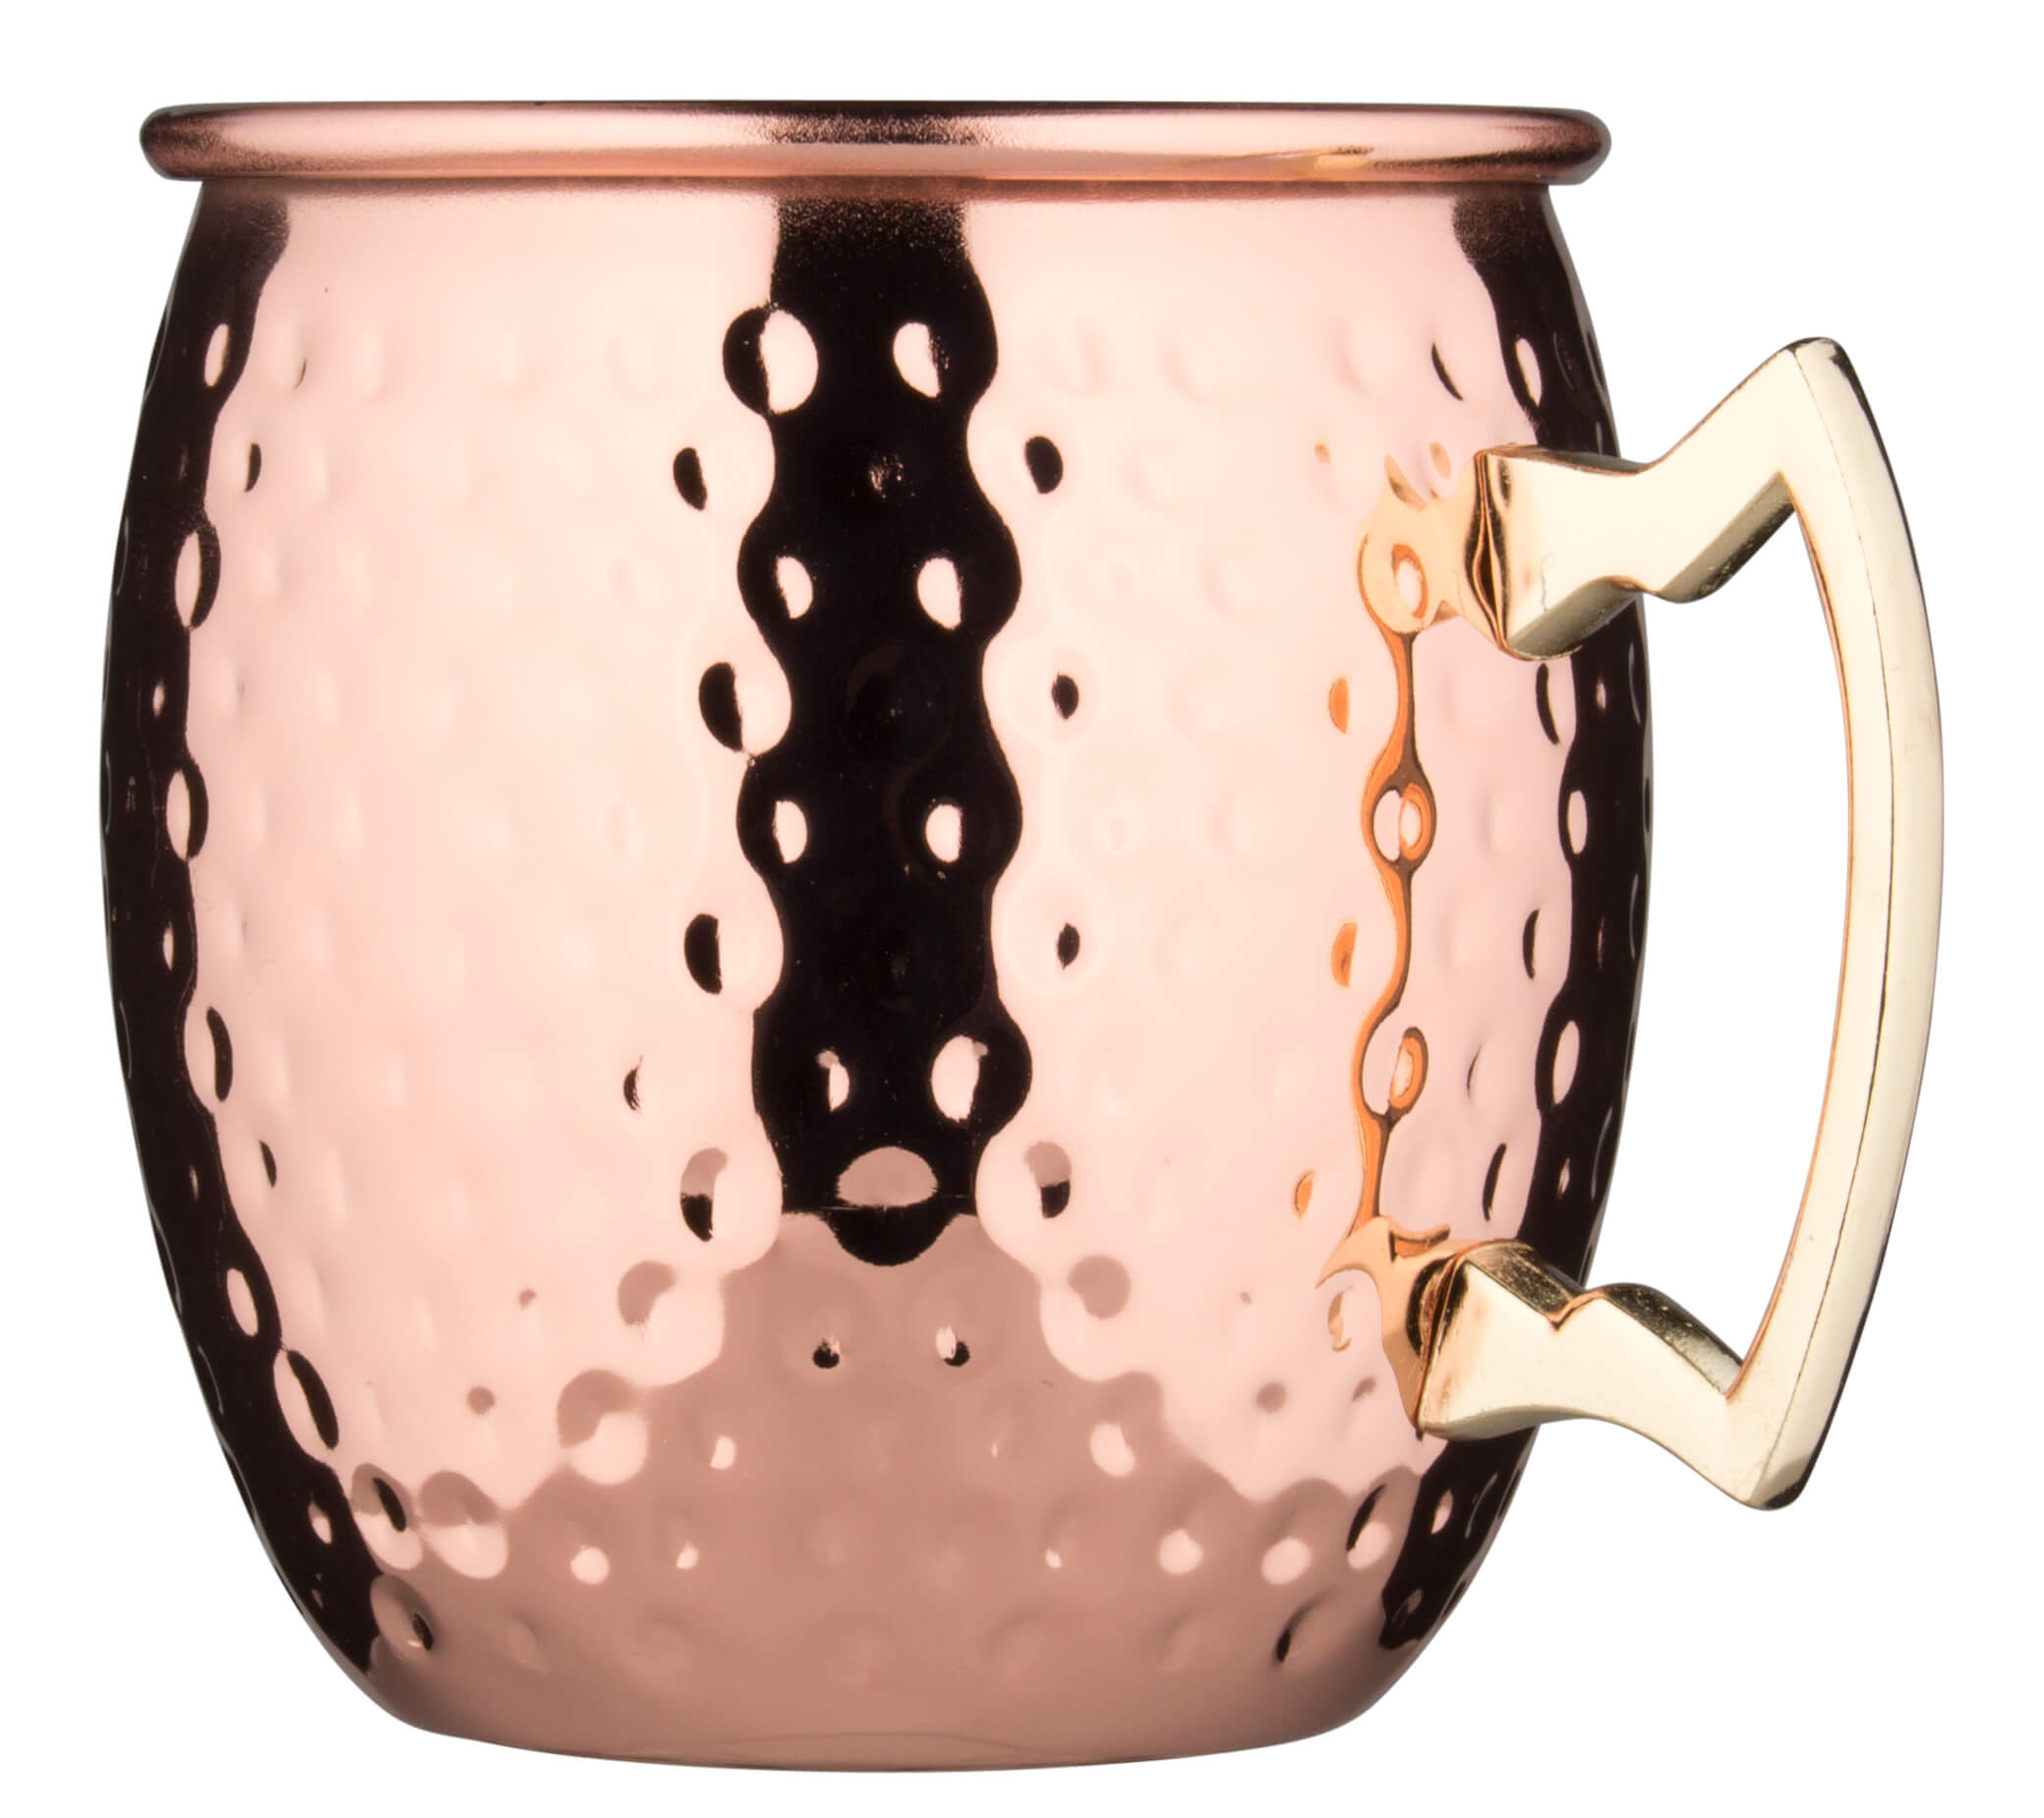 Stainless steel mug Moscow Mule, copper colored, hammered - 550ml